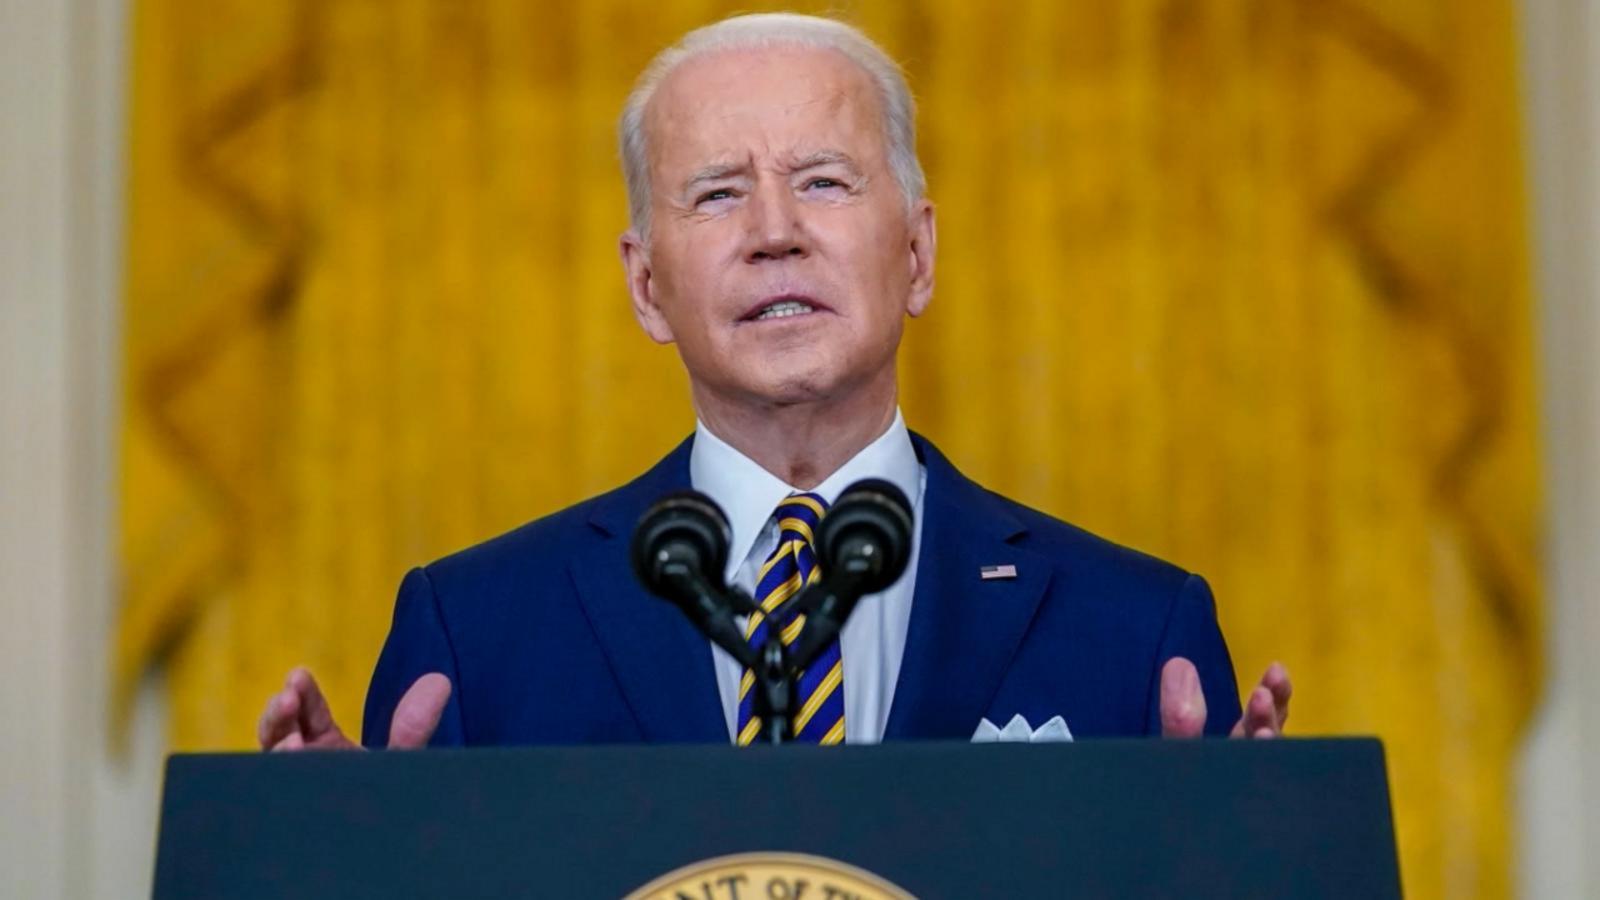 VIDEO: Biden to deliver State of the Union address Thursday night